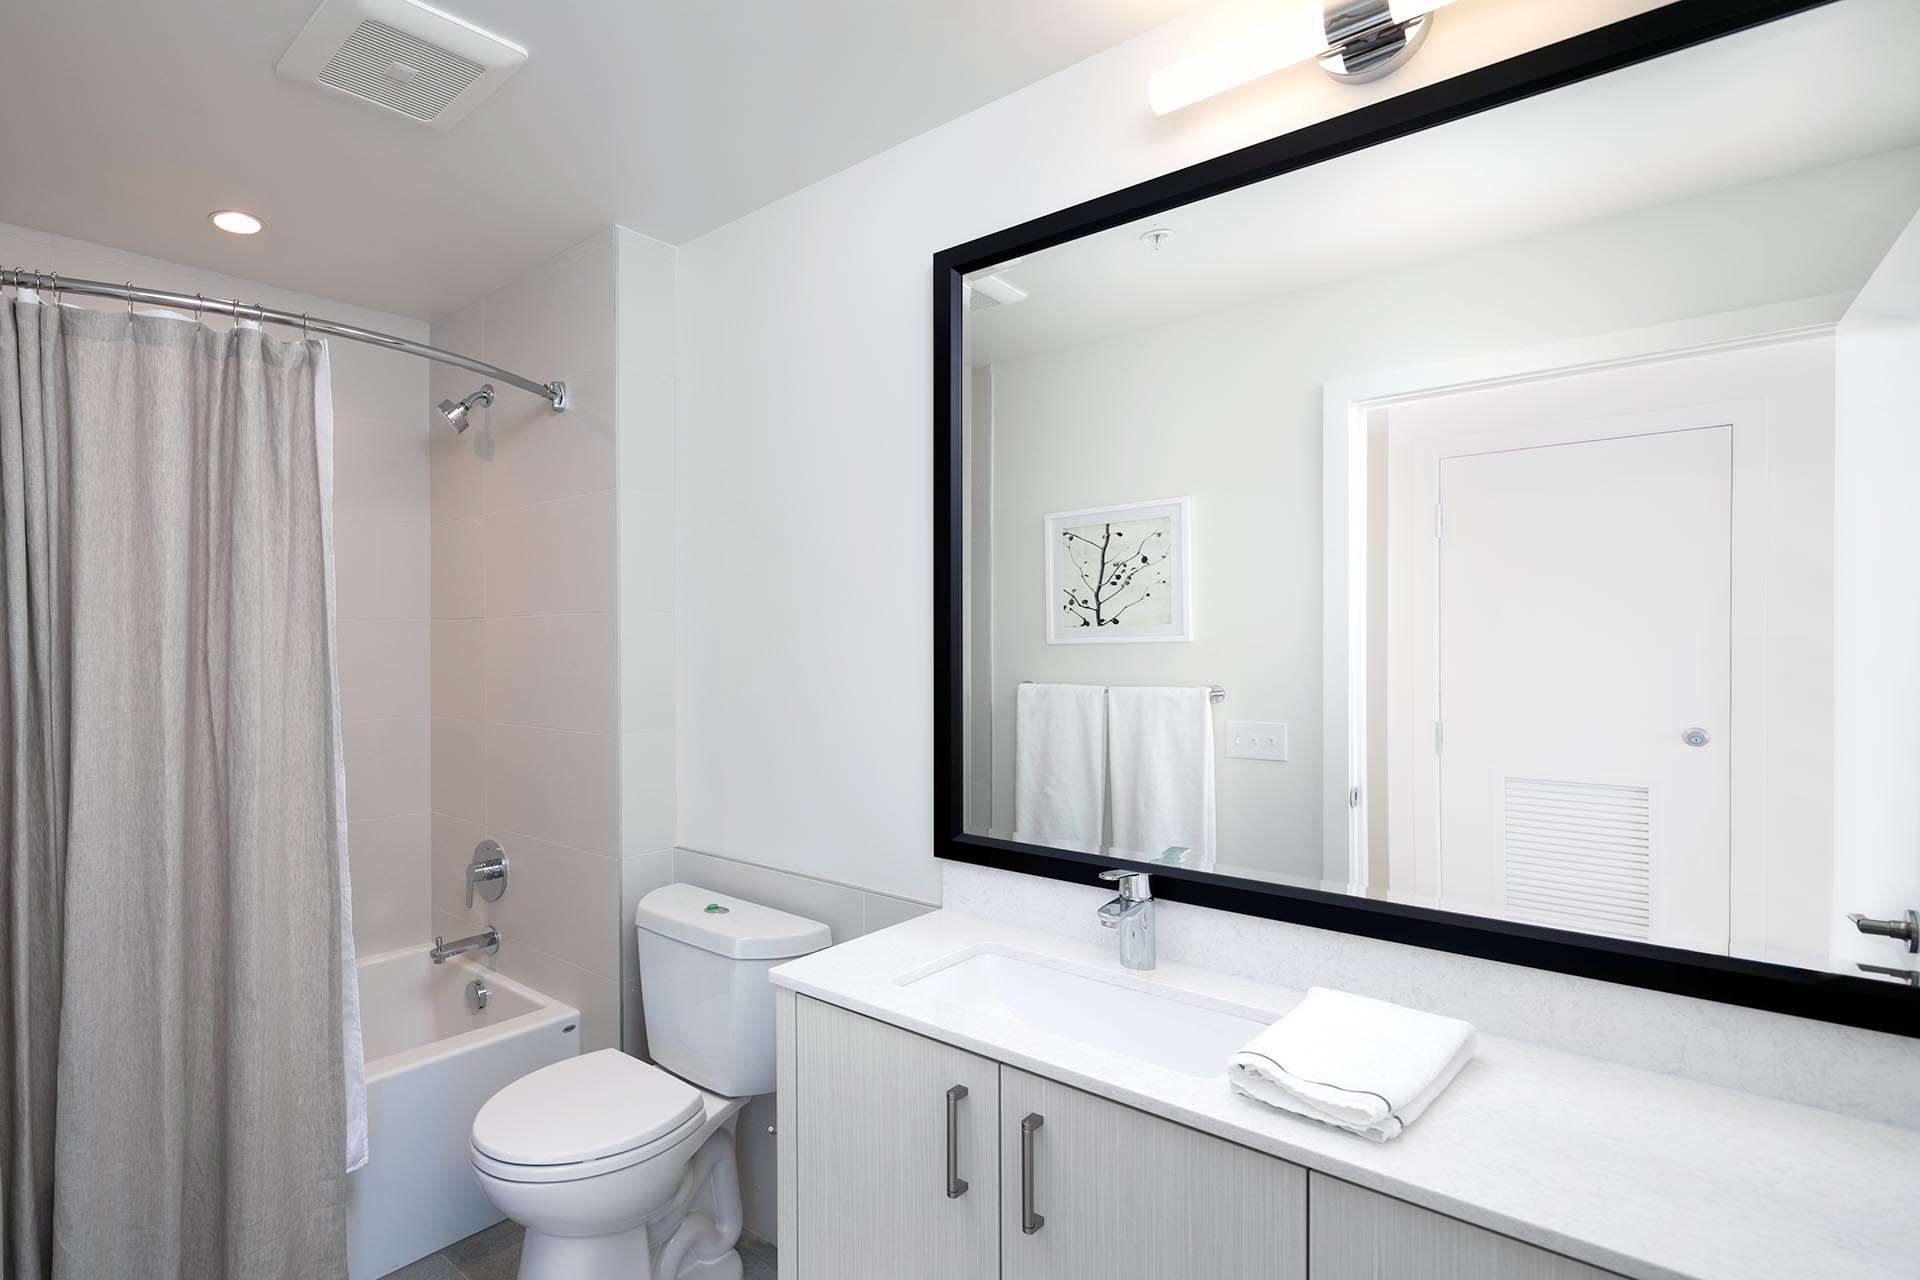 Expansive mirror in this pleasant bathroom with shower & tub in the background